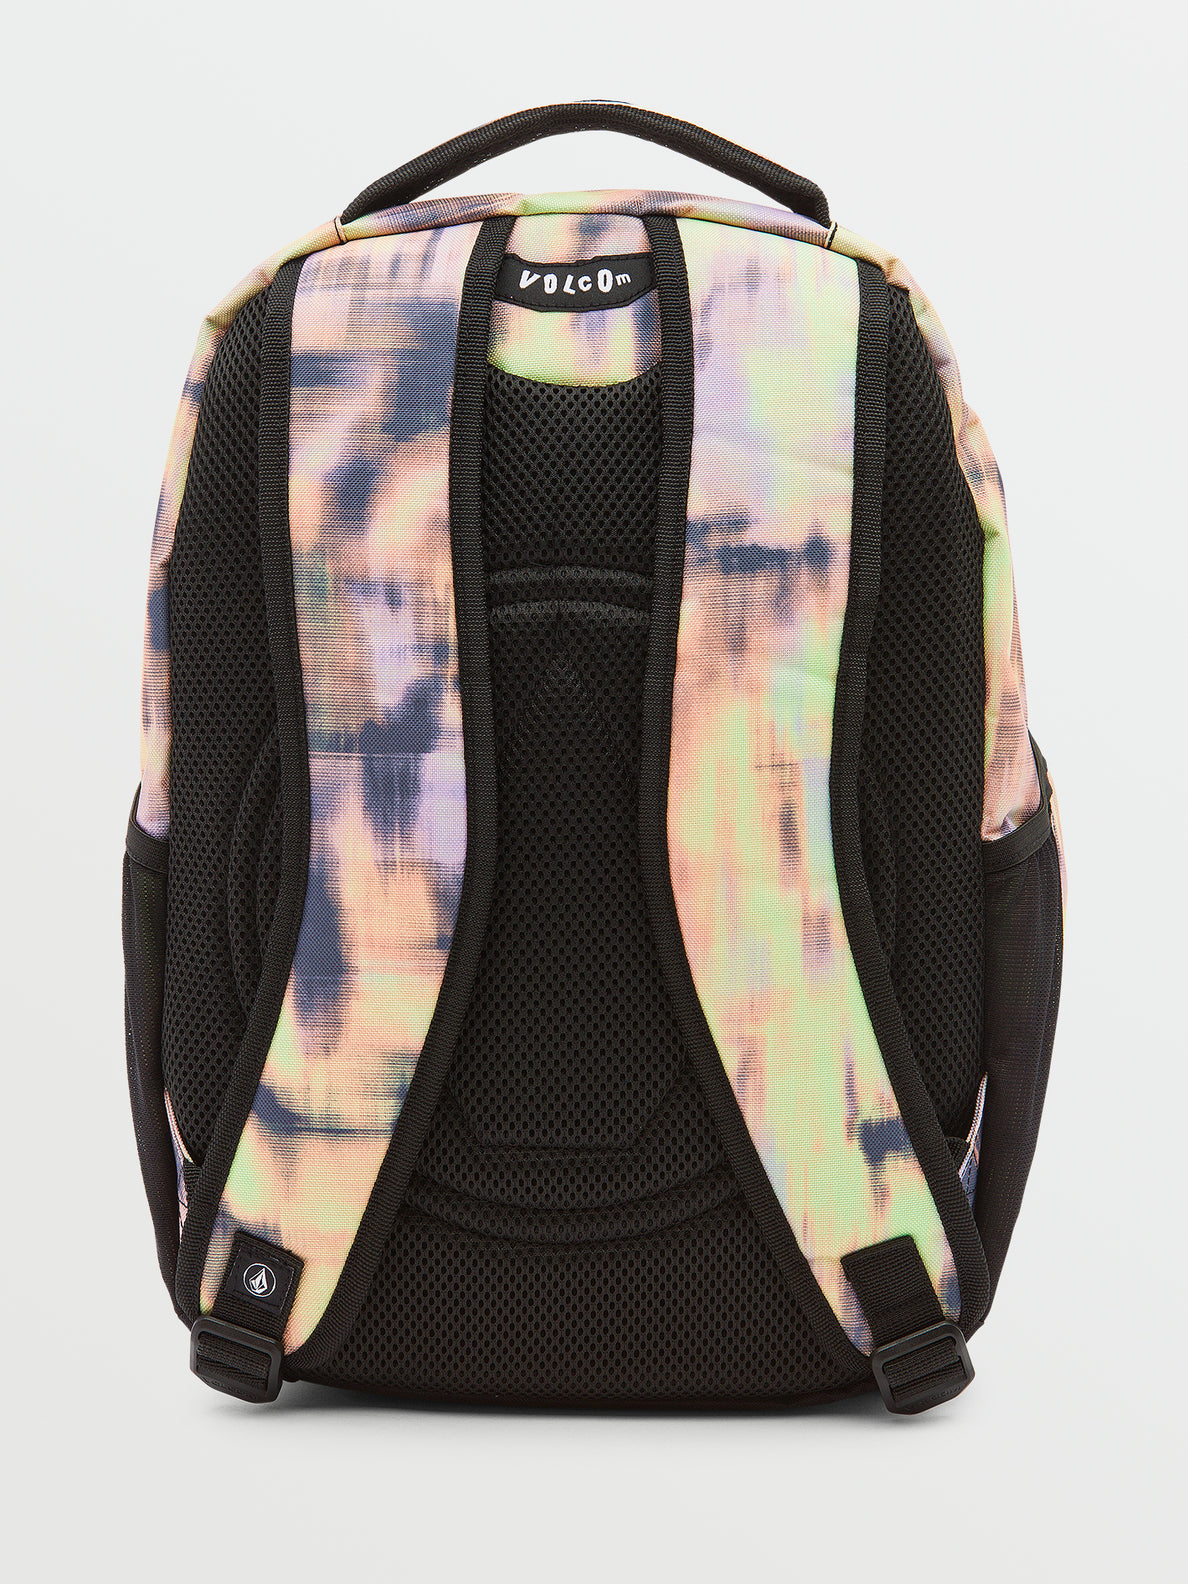 Youth Weestone Backpack - Storm Cloud